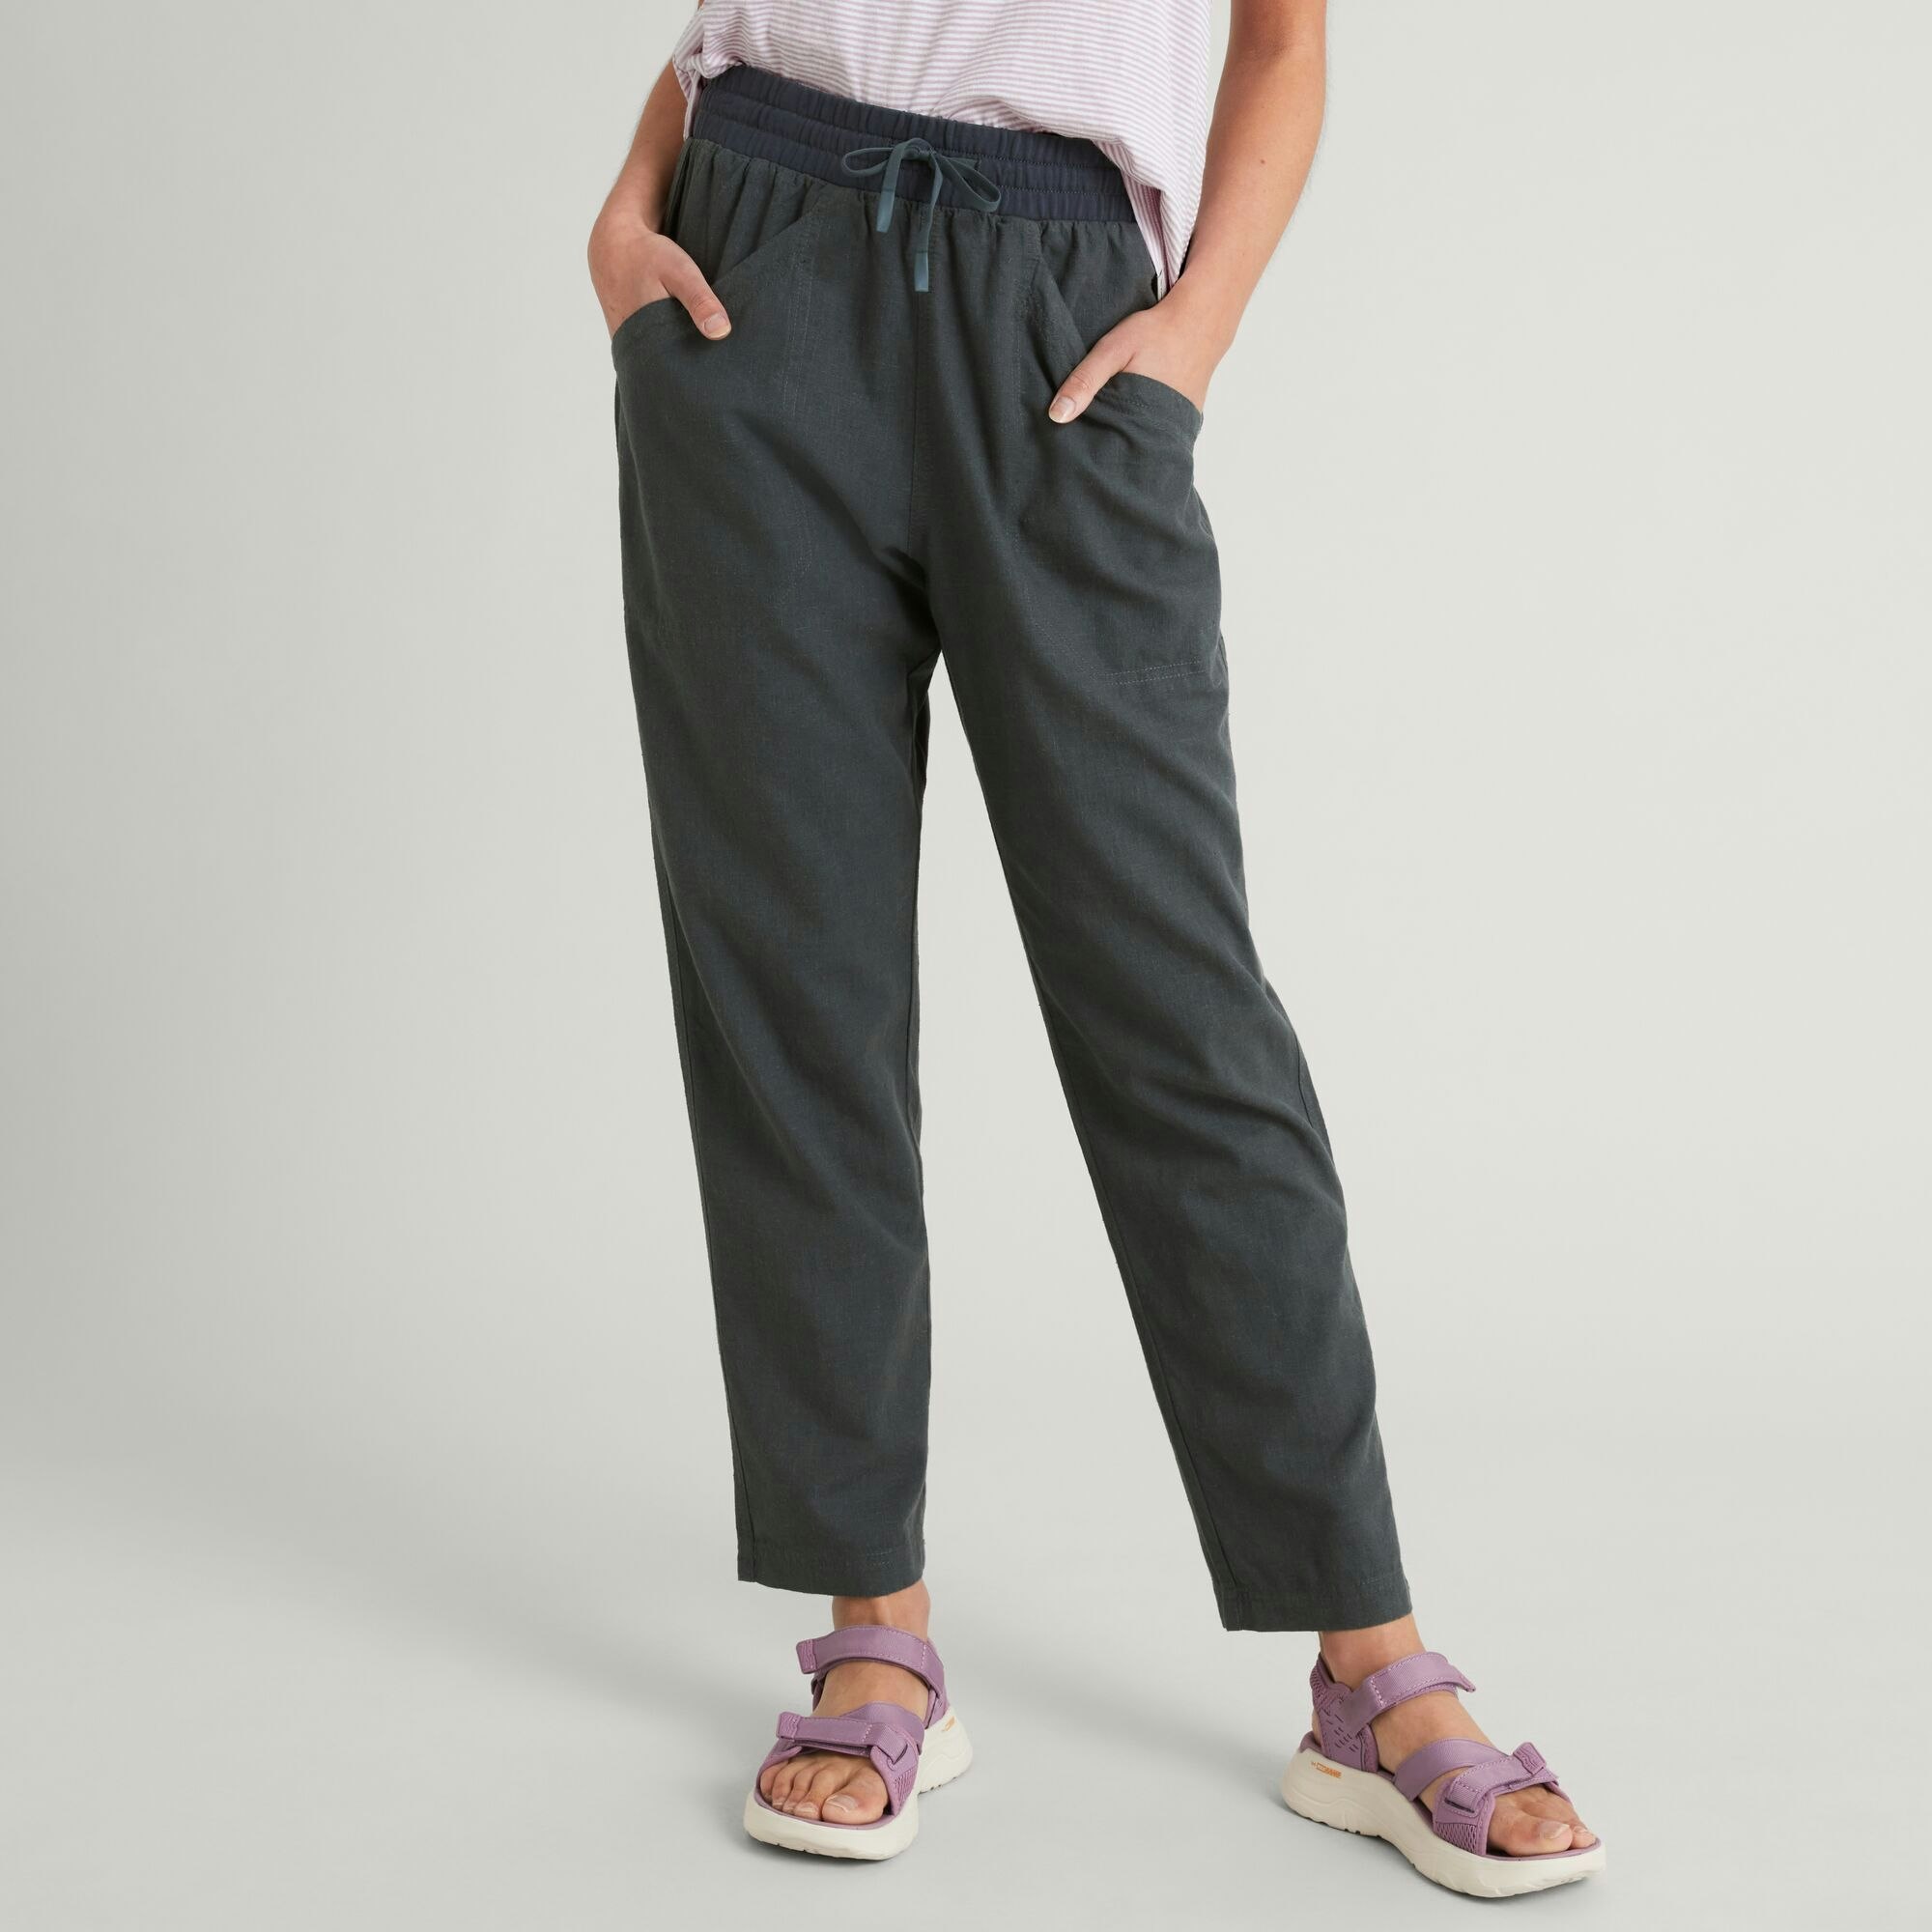 Discover more than 147 hemp trousers